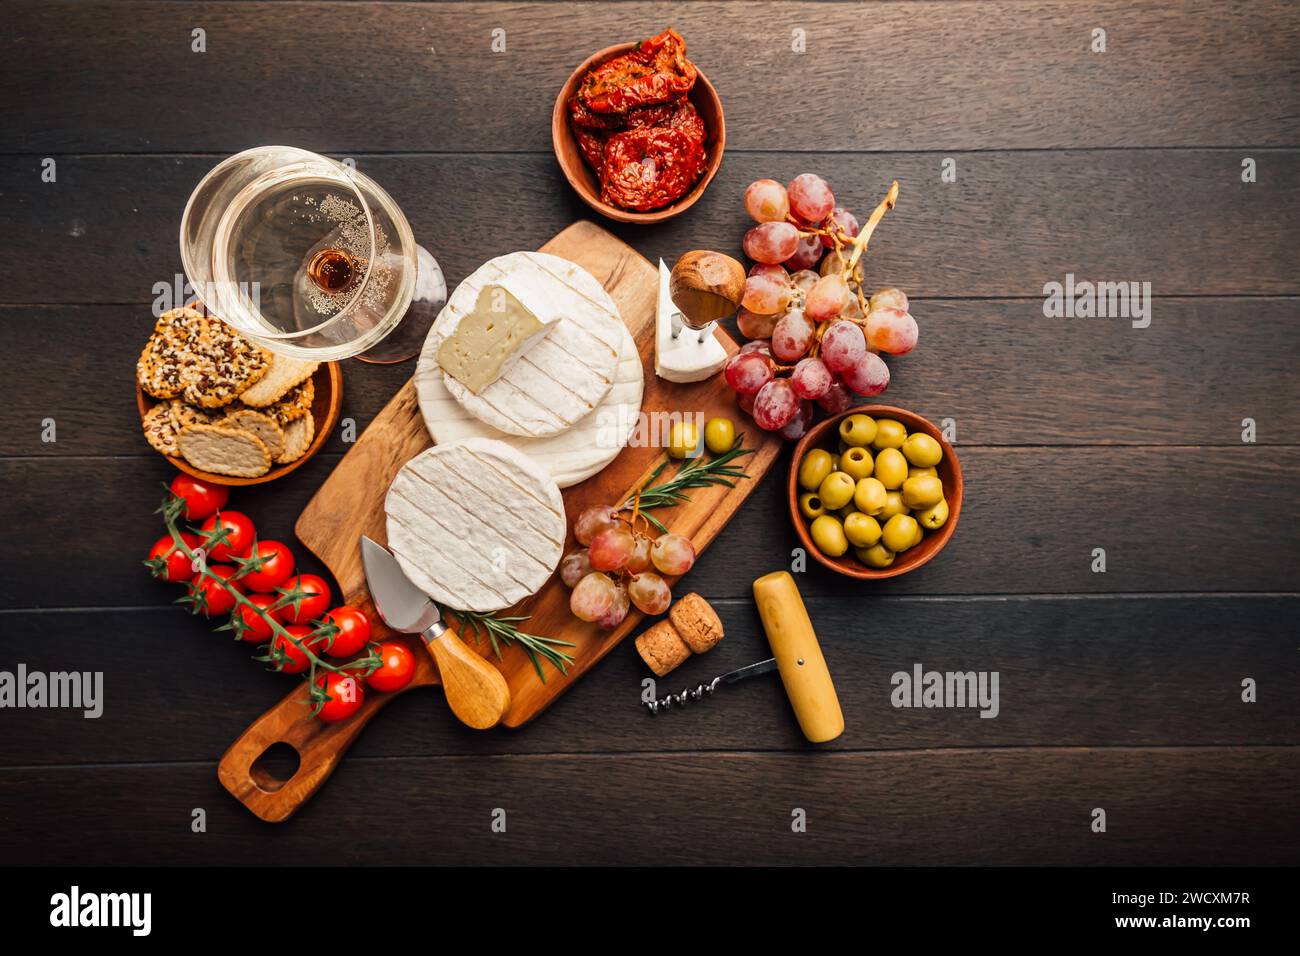 Cheese platter with brie, Camembert, grapes, olives and tomatoes Stock Photo